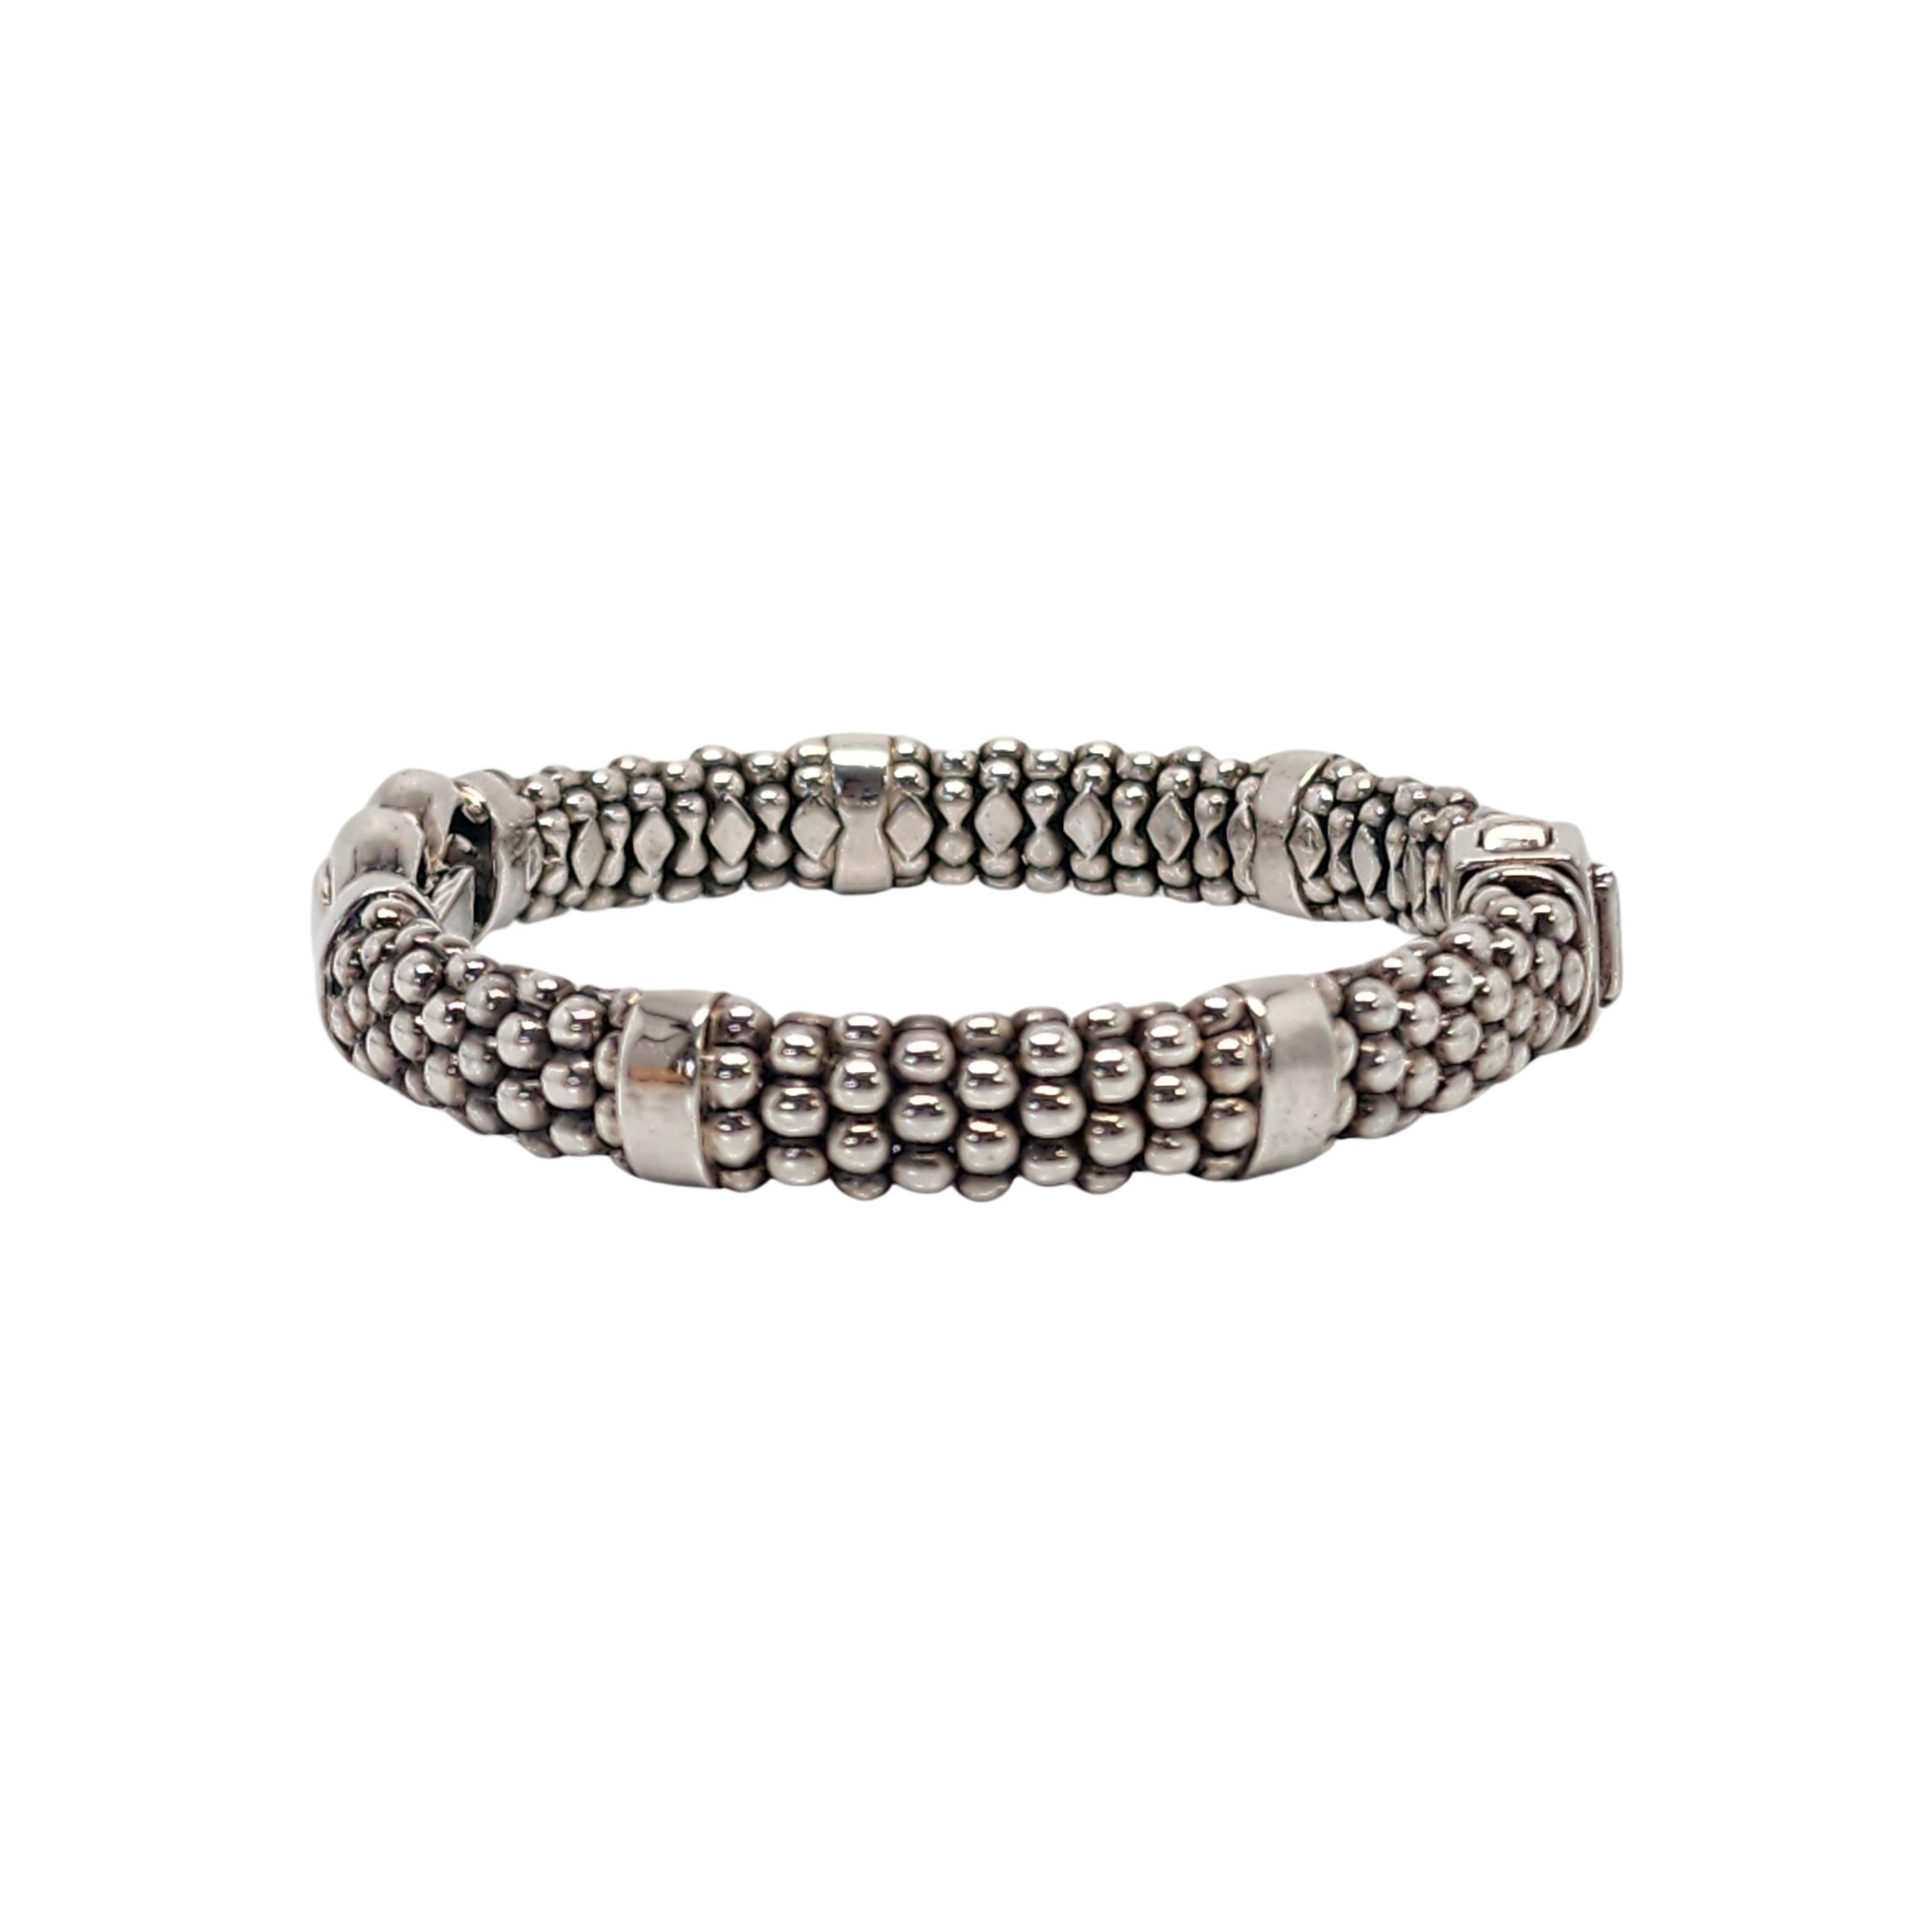 Lagos Caviar sterling silver Derby Buckle Bracelet.

Beautiful sterling silver caviar bracelet with double loop buckle at front. Push clasp closure.

Measures approx  6 3/4